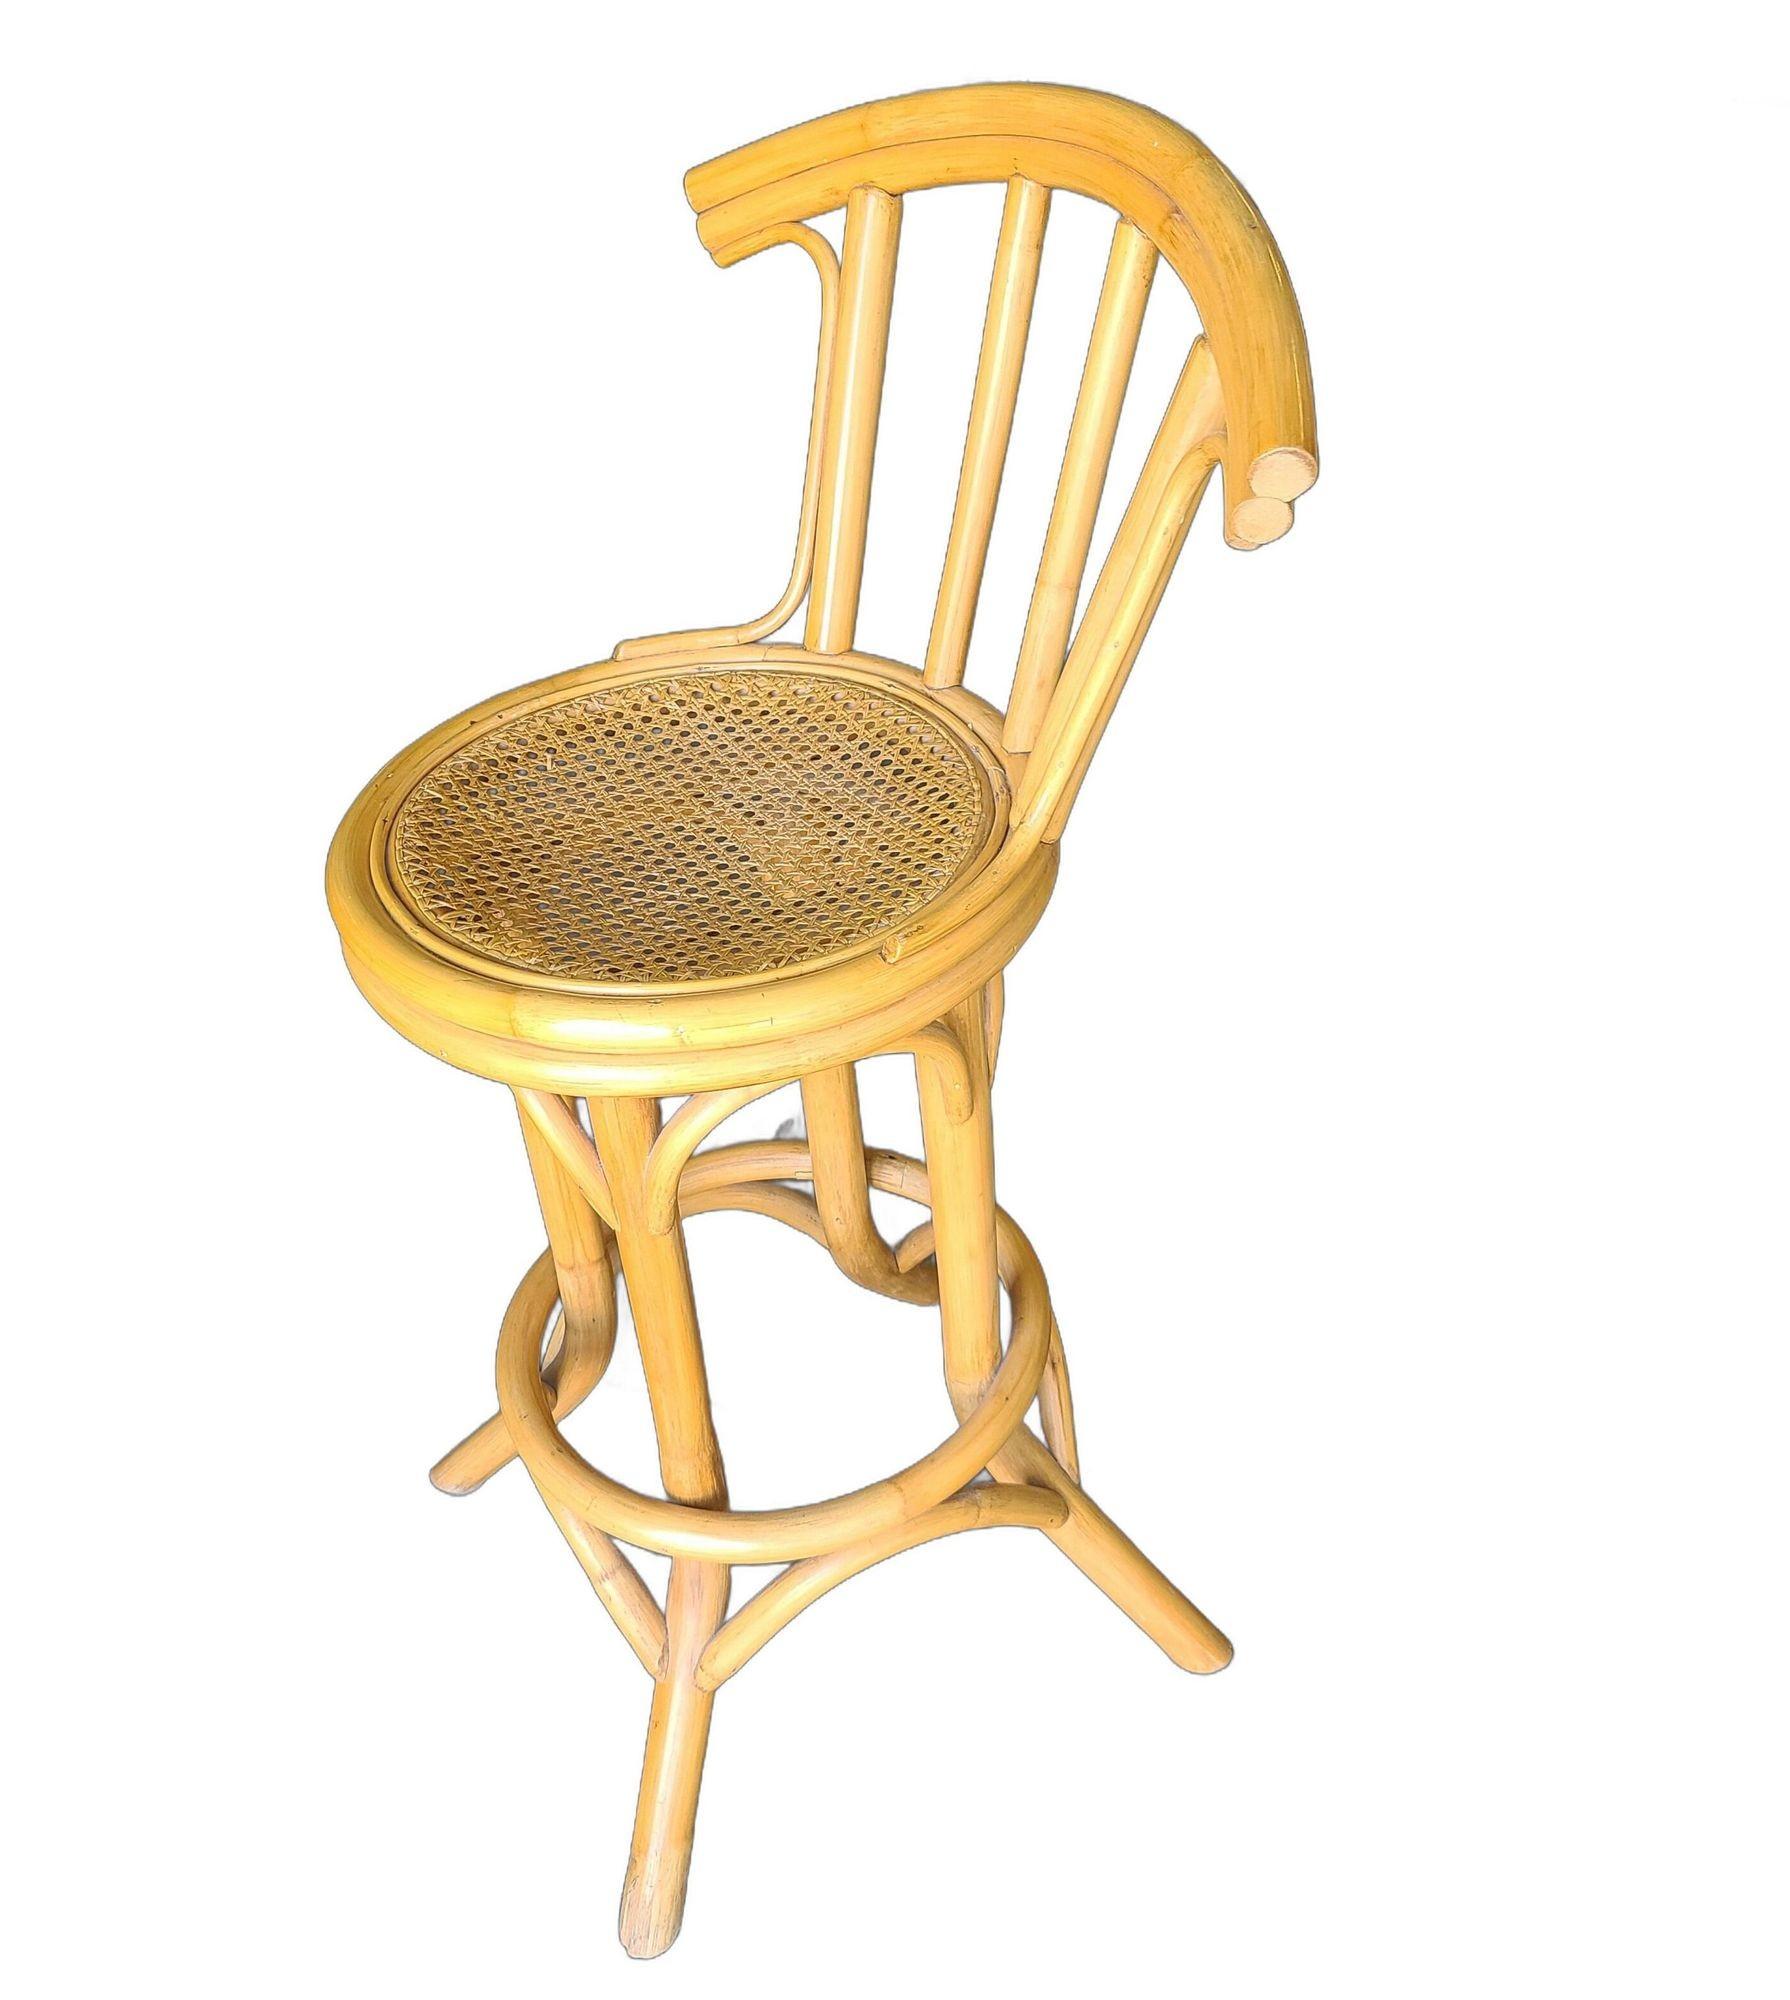 Rattan bar stool with woven wicker seats and 3 strand rattan pull legs. Stool comes with a full formed back rest complimented by arches connecting each leg.

Measures: Height- 38